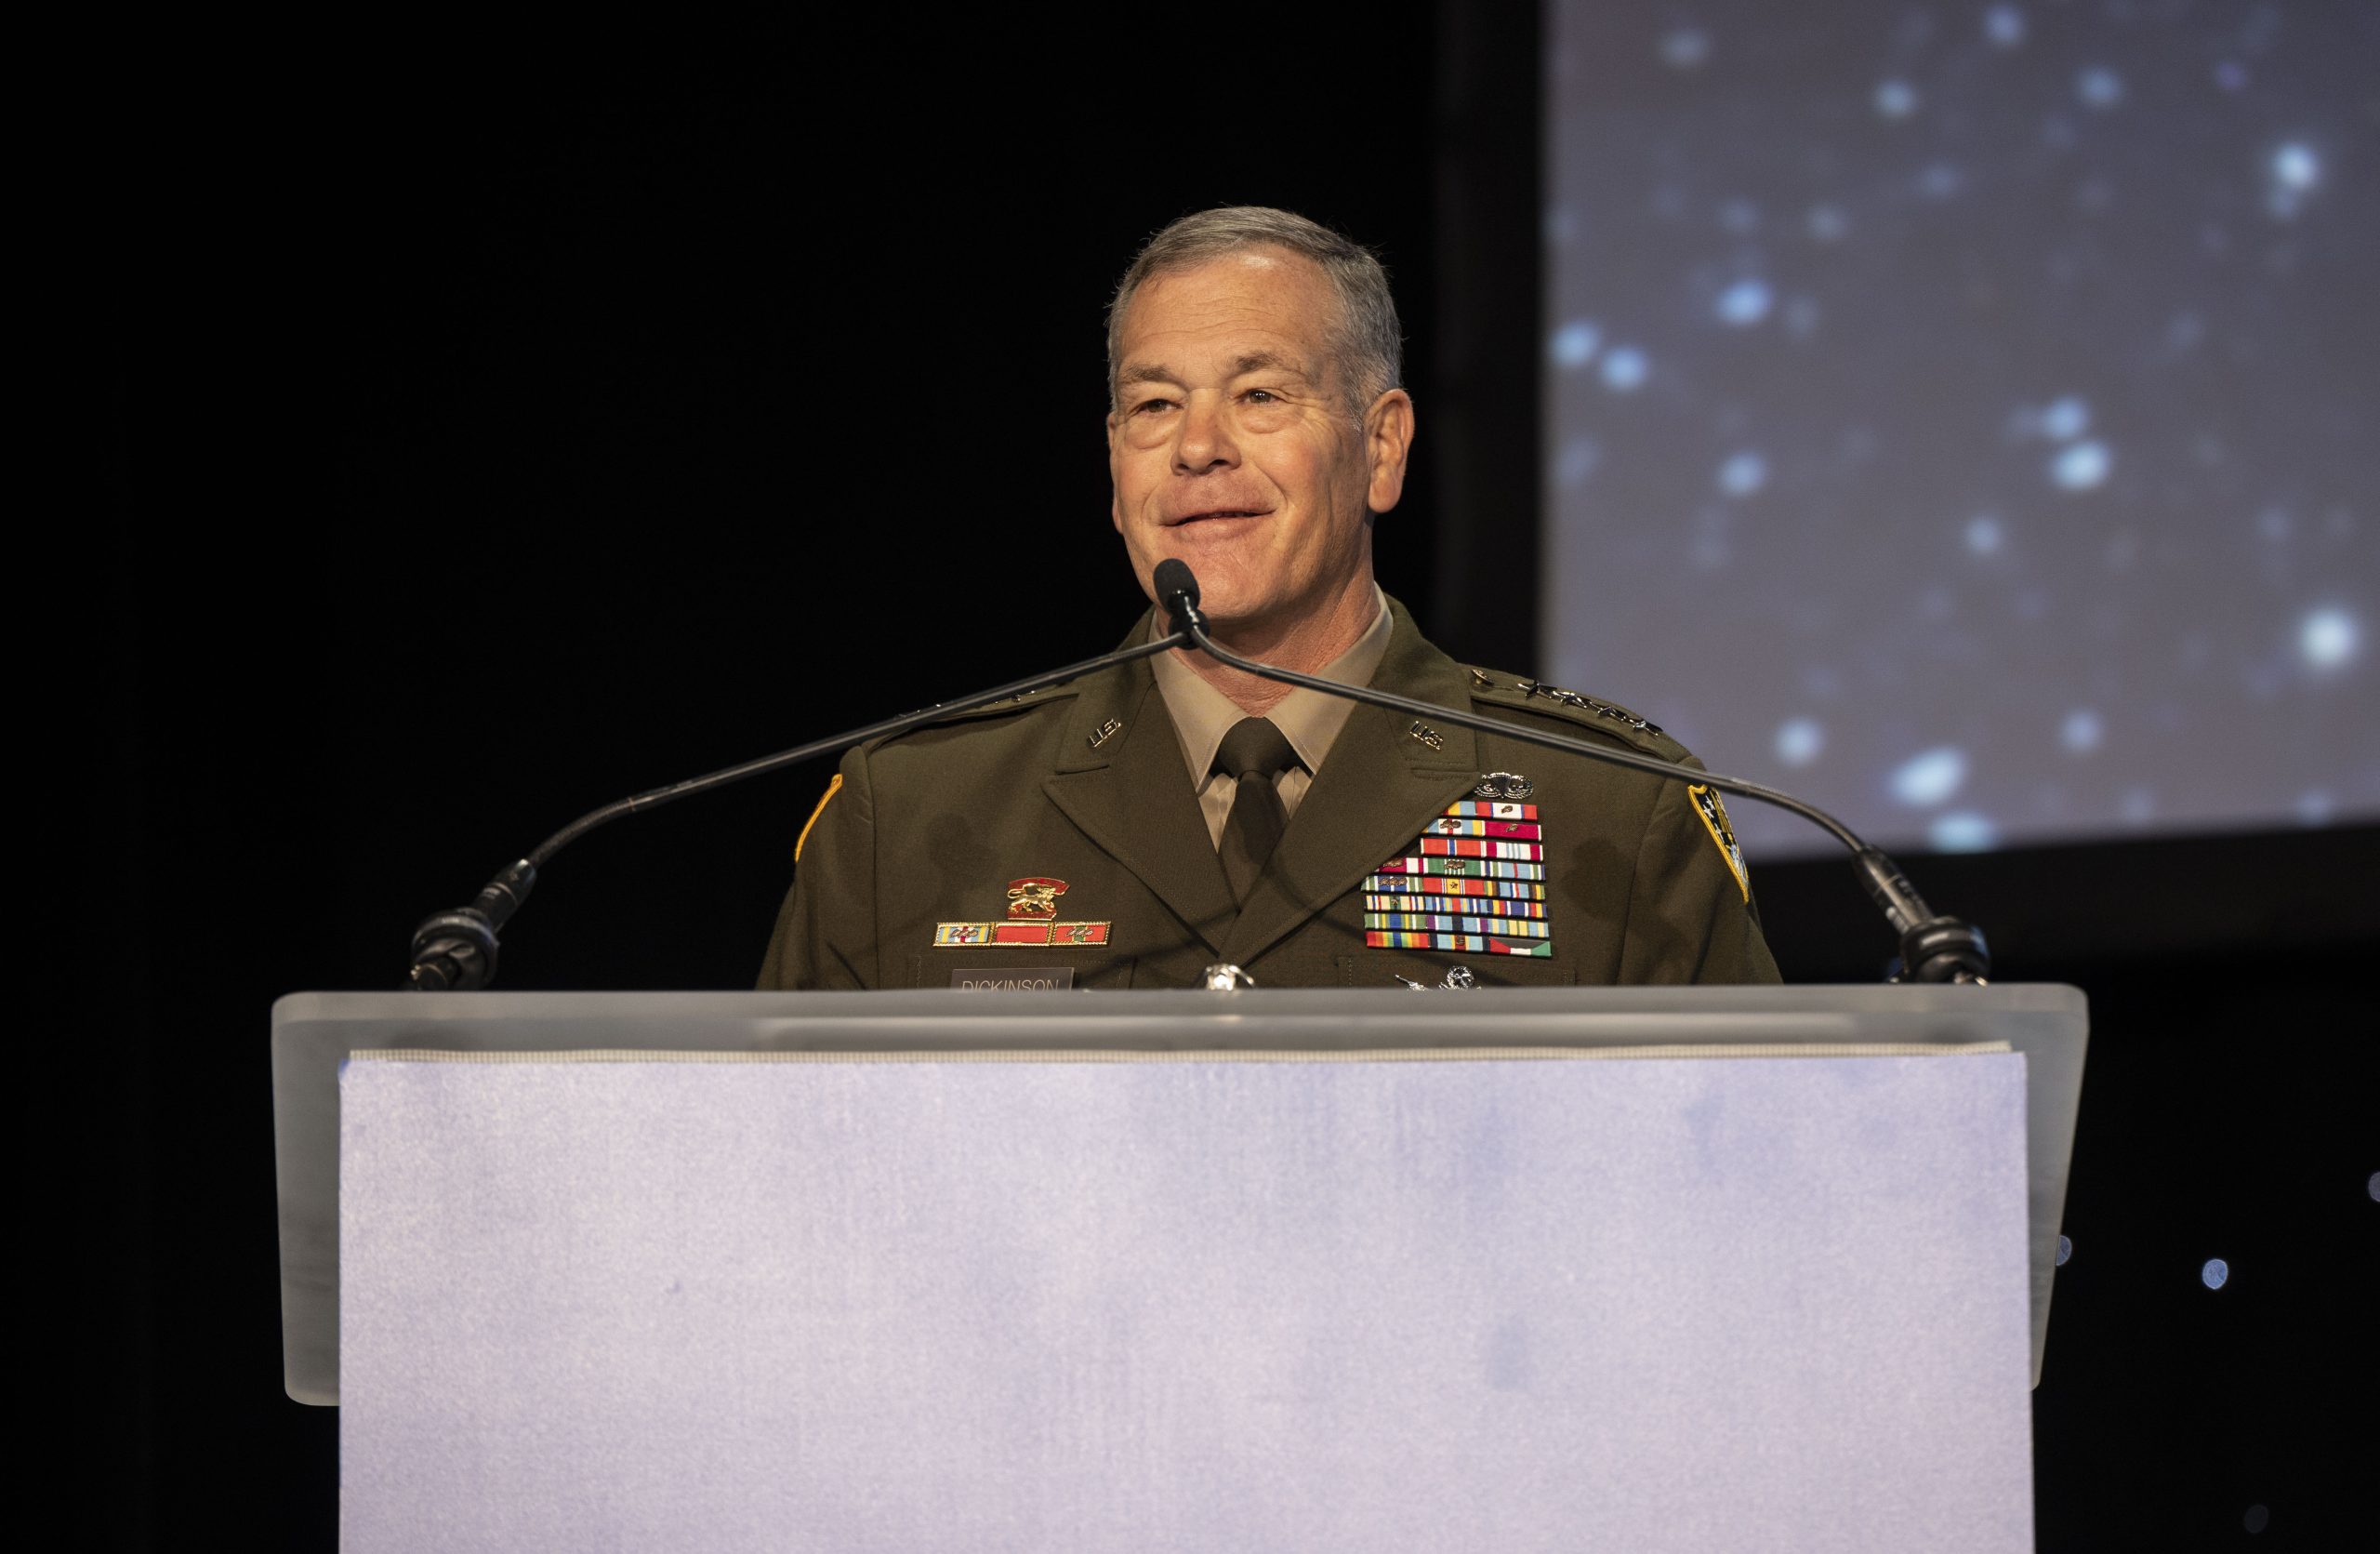 Pentagon Leaders Emphasize ‘Responsible’ Options for Countering Space Weapons